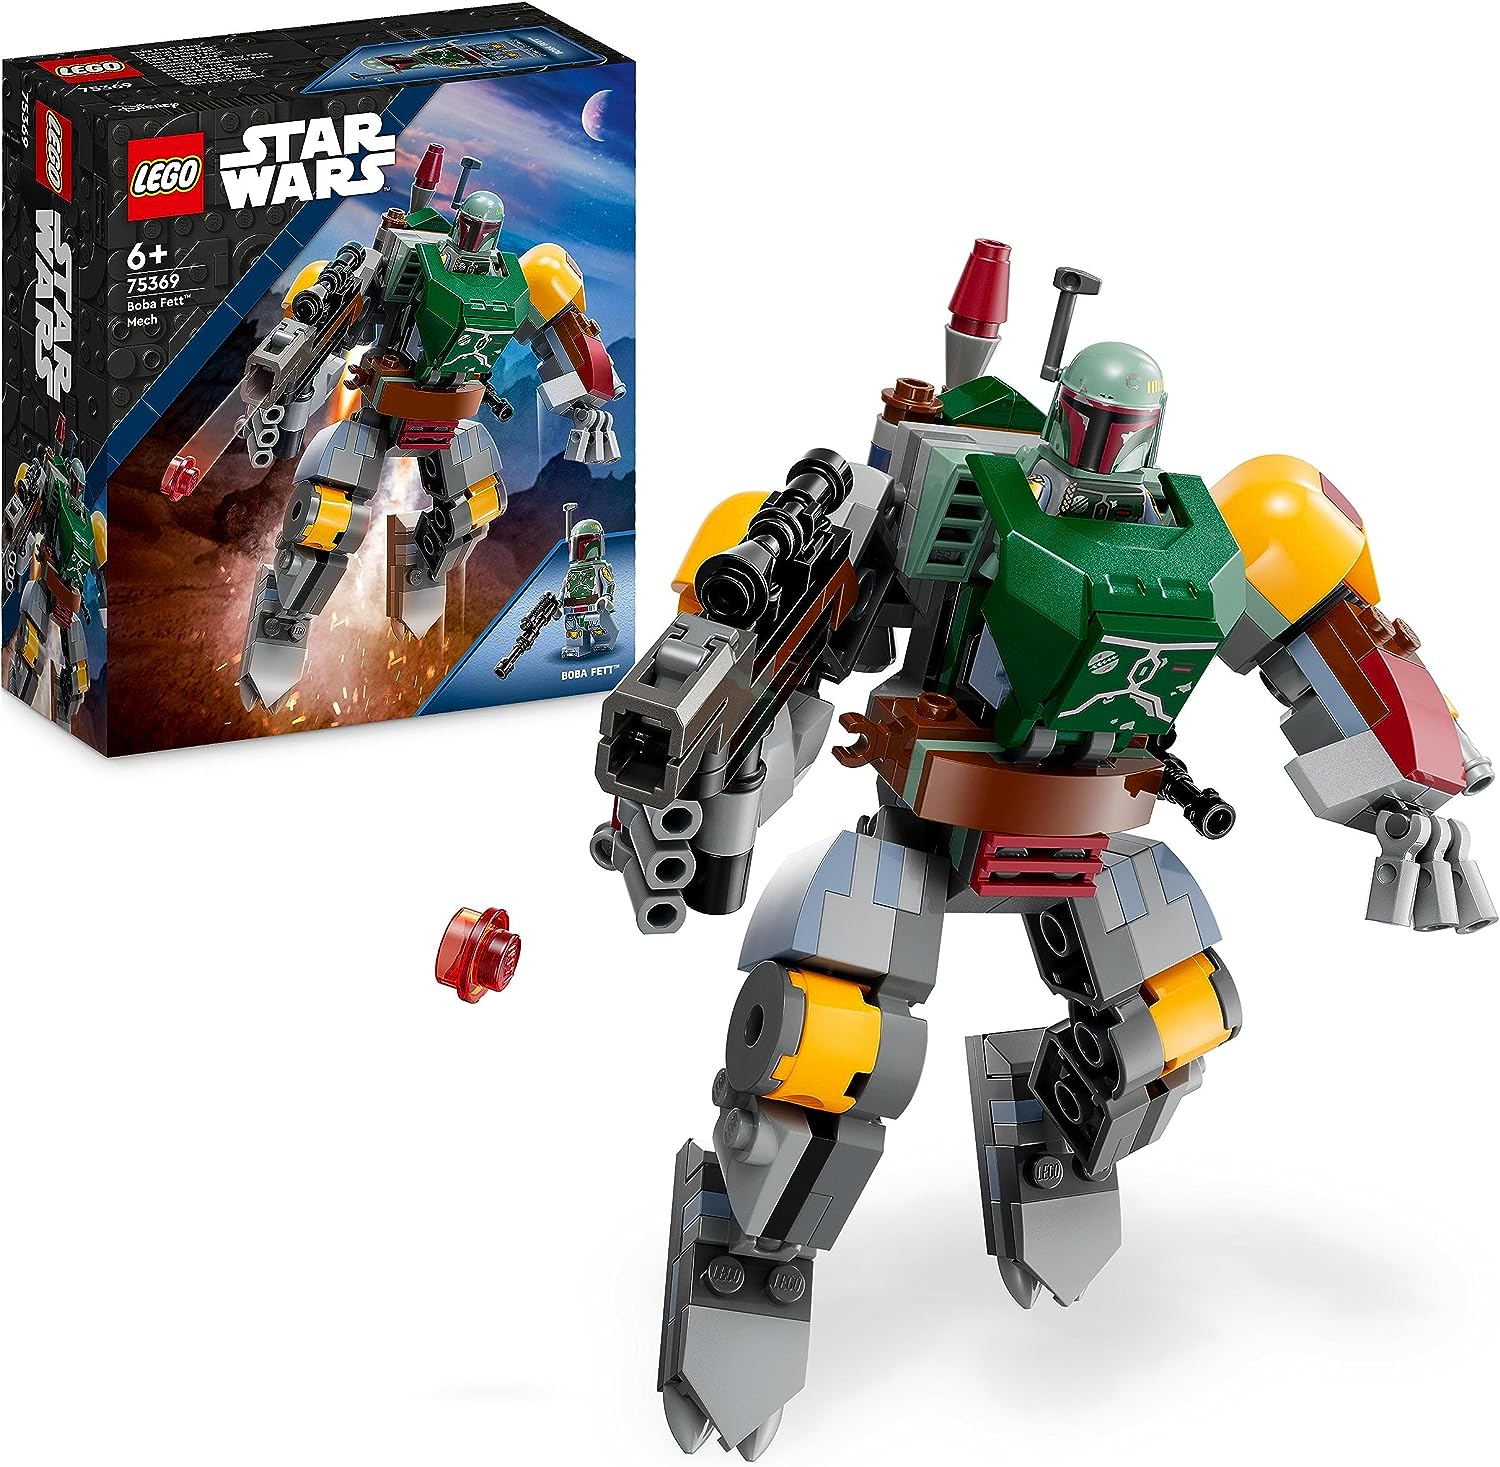 LEGO 75369 Star Wars Boba Fett Mech Buildable Action Figure with Blaster and Rocket Backpack with Flick Shooter Collectible Set for Kids